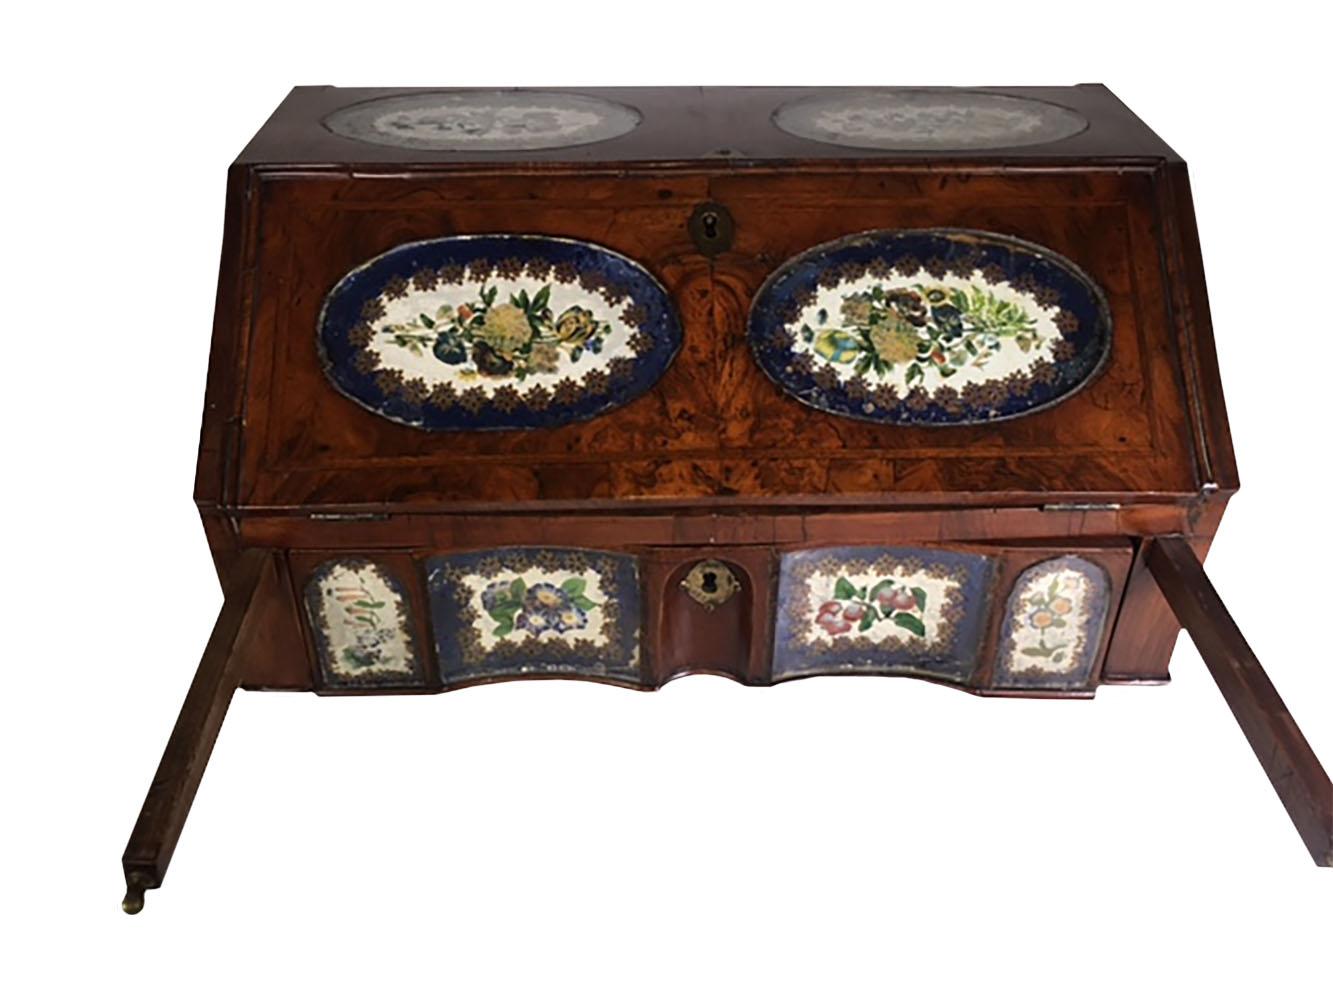 Rare English table top fall front writing desk in burl walnut and blue eglomise painted oval panels. Ten panels inside painted with flowers and fruit surrounded with blue trim. Inside fitted with drawers. Circa 1780-1820.